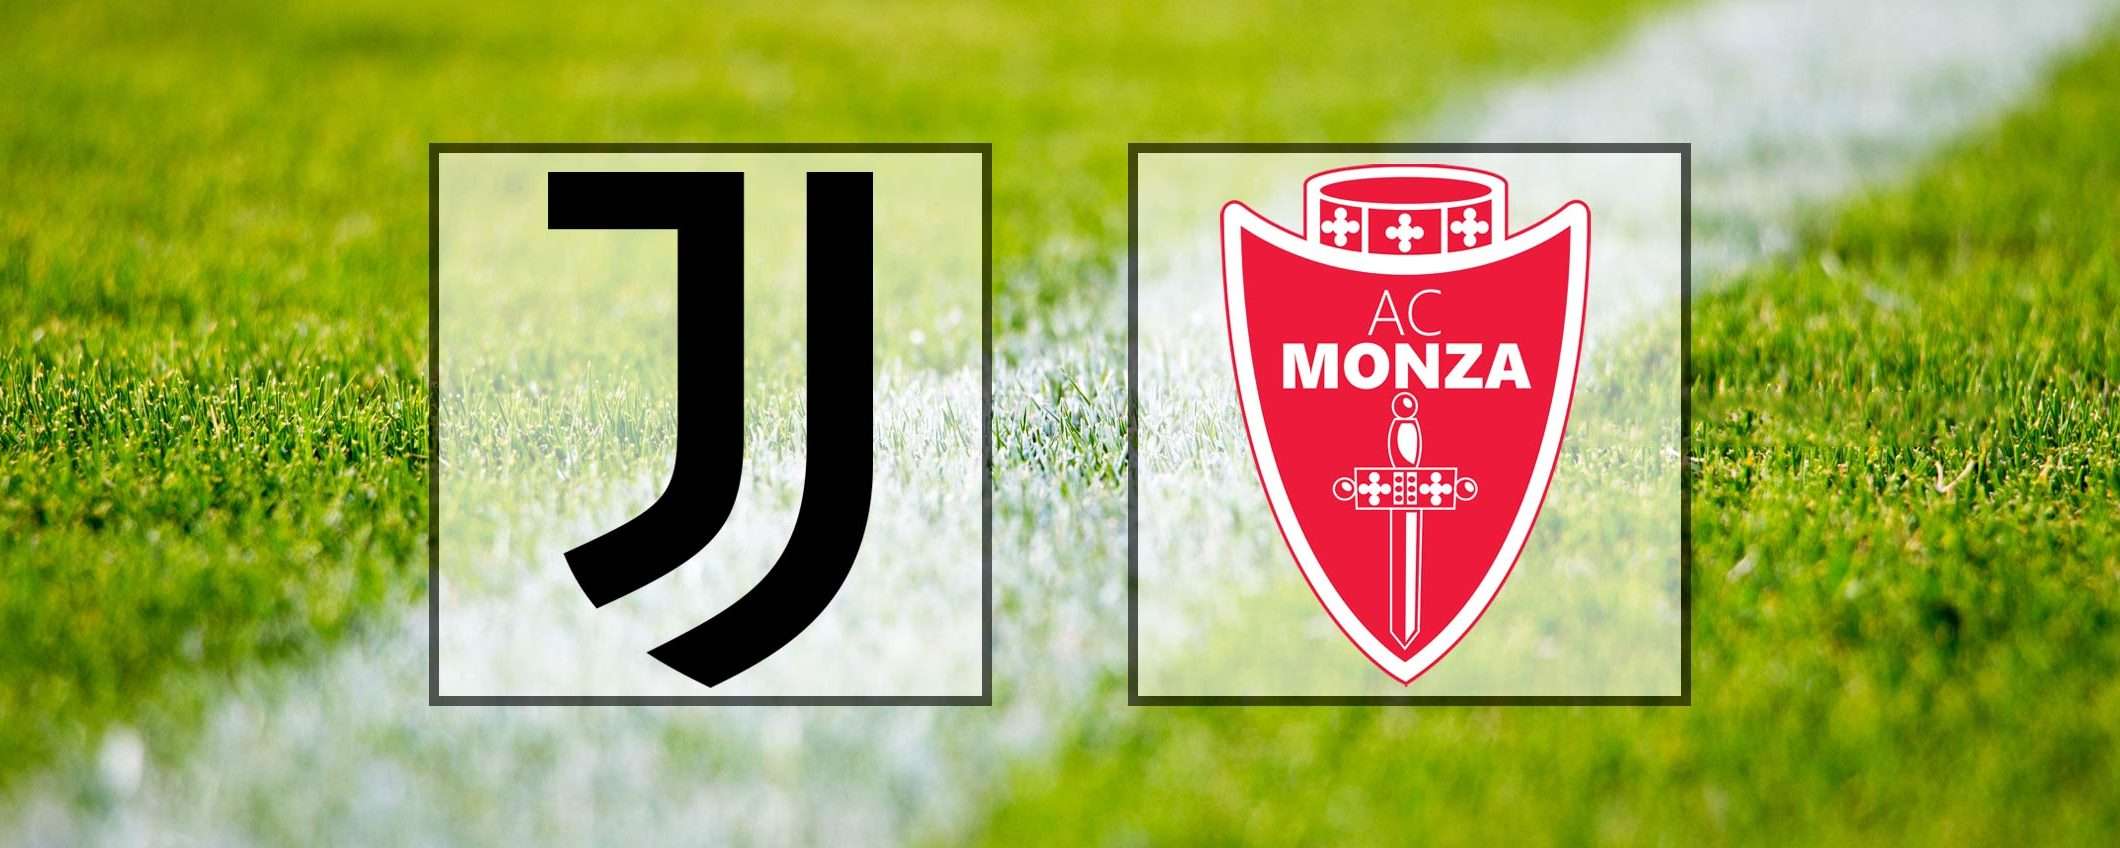 Come vedere Juventus-Monza in streaming